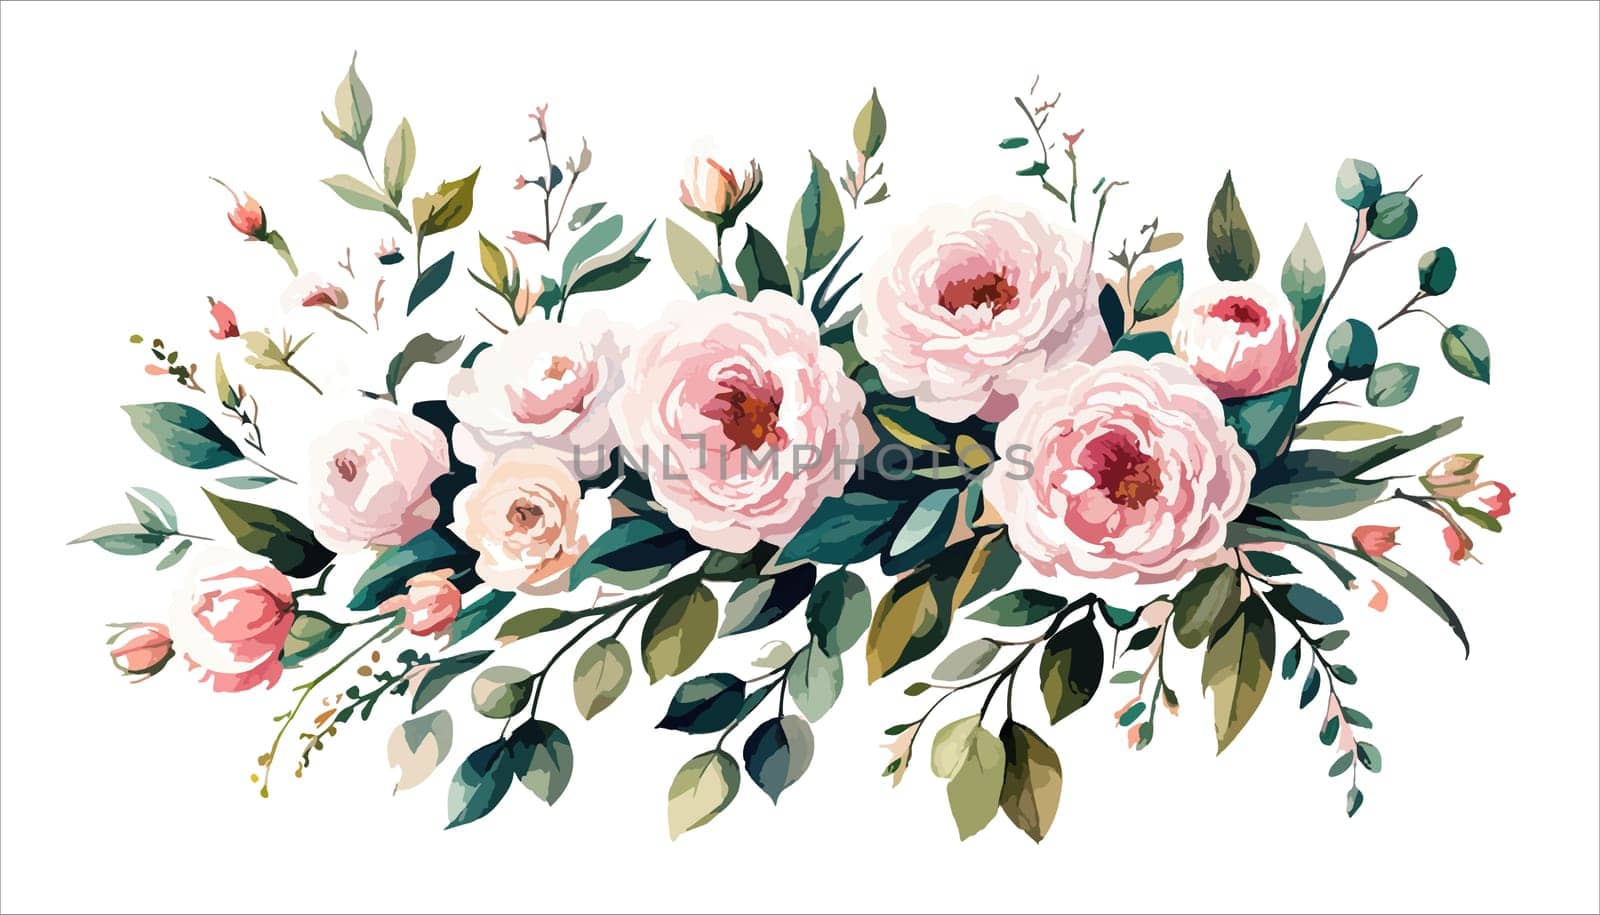 Watercolor illustration of bouquet with pink roses and buds, green leaves by EkaterinaPereslavtseva